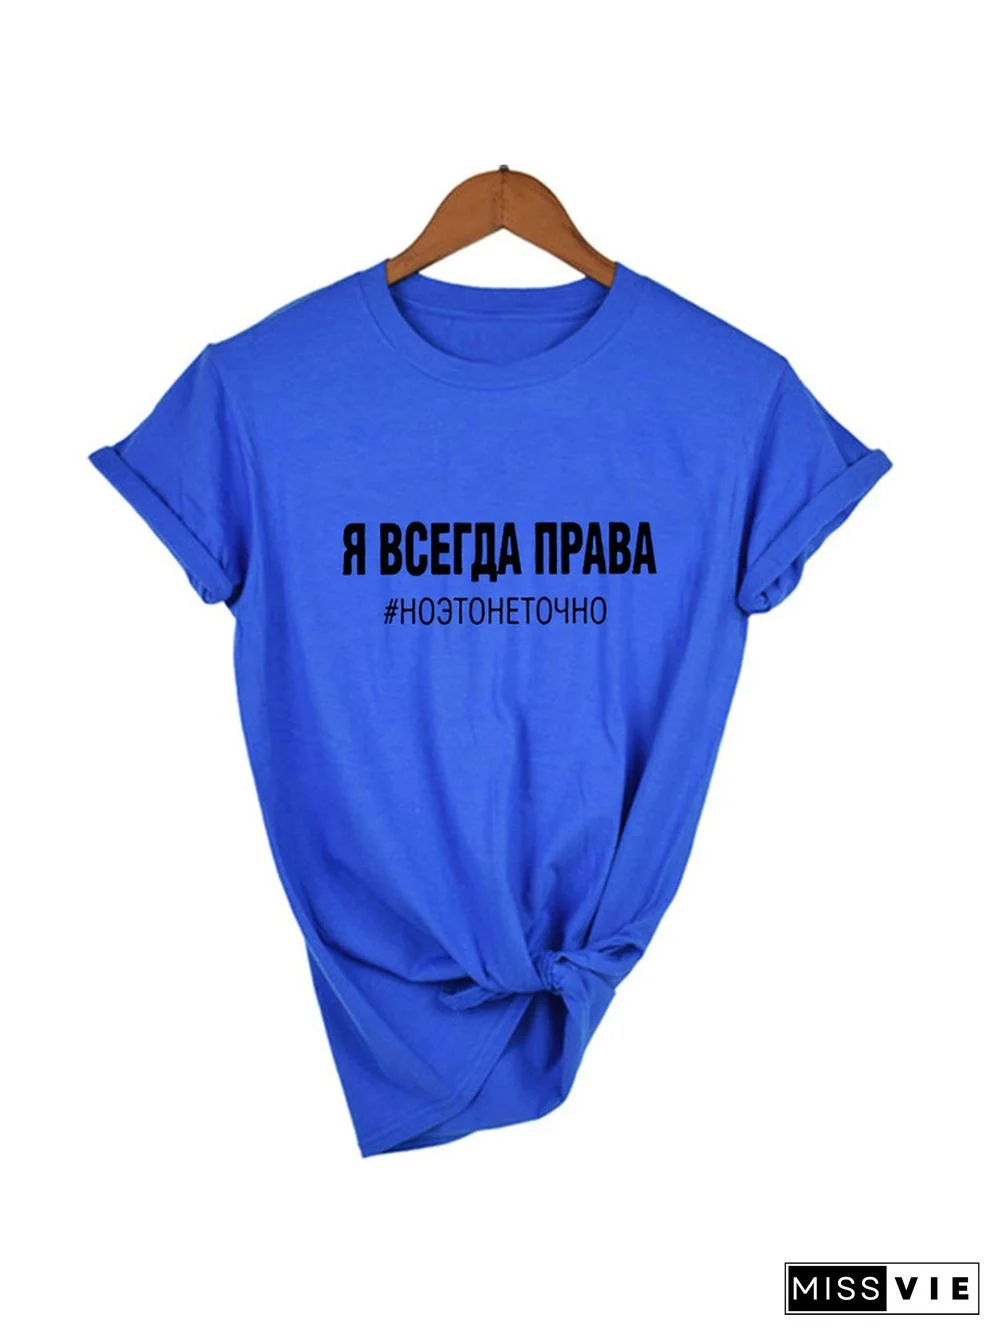 Women Short Sleeve T-shirtWith Russian Inscriptions Aesthetic Casual Female Tees Tumblr Summer 90s Tops Camisetas Mujer Quotes